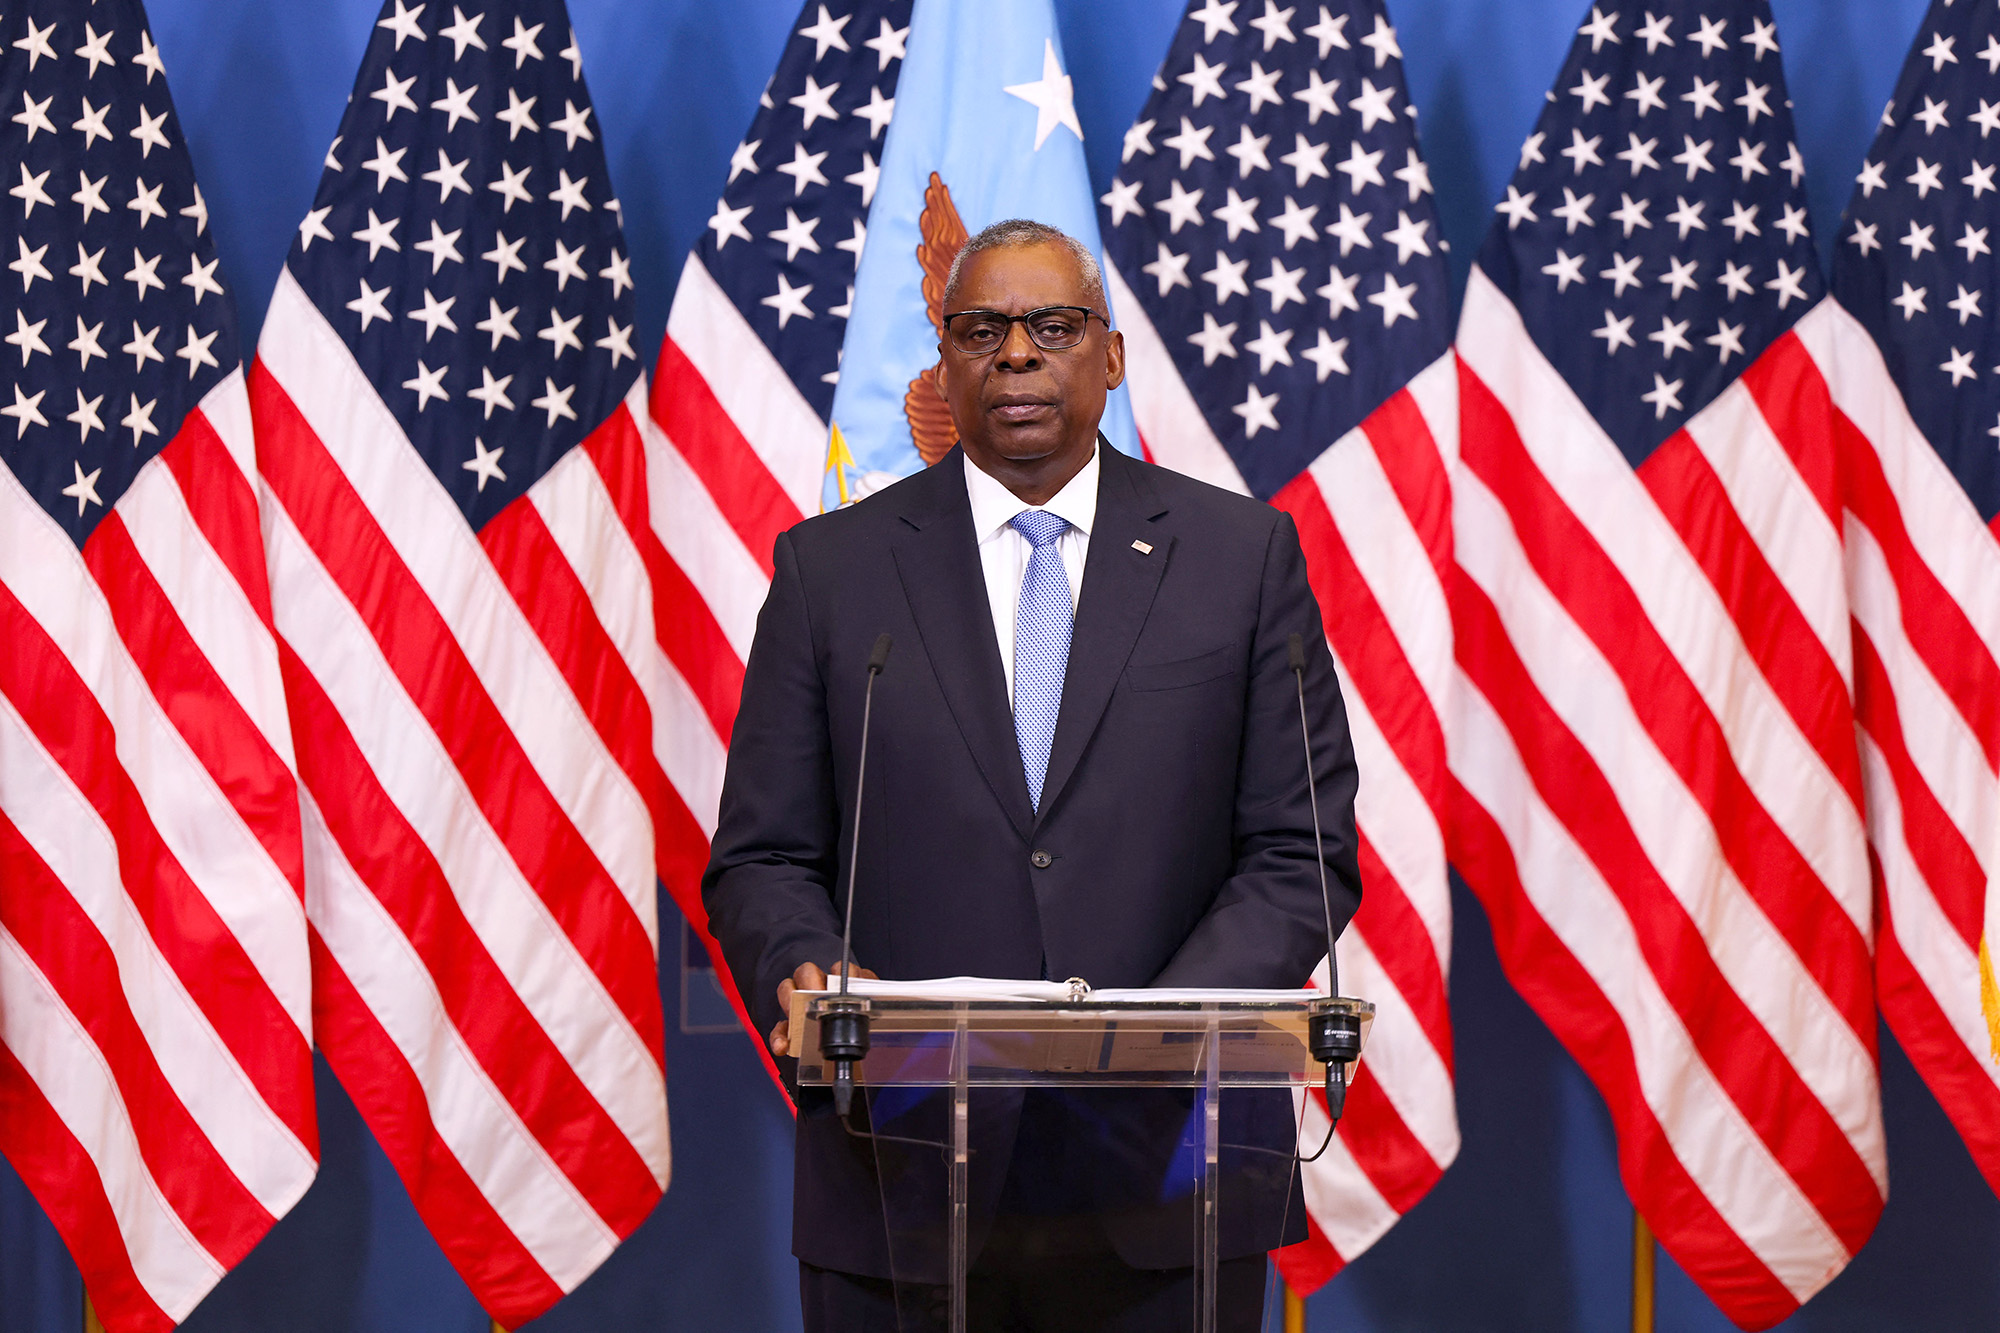 US Secretary of Defense Lloyd Austin gives a press conference at the NATO headquarters in Brussels, Belgium, on June 15.